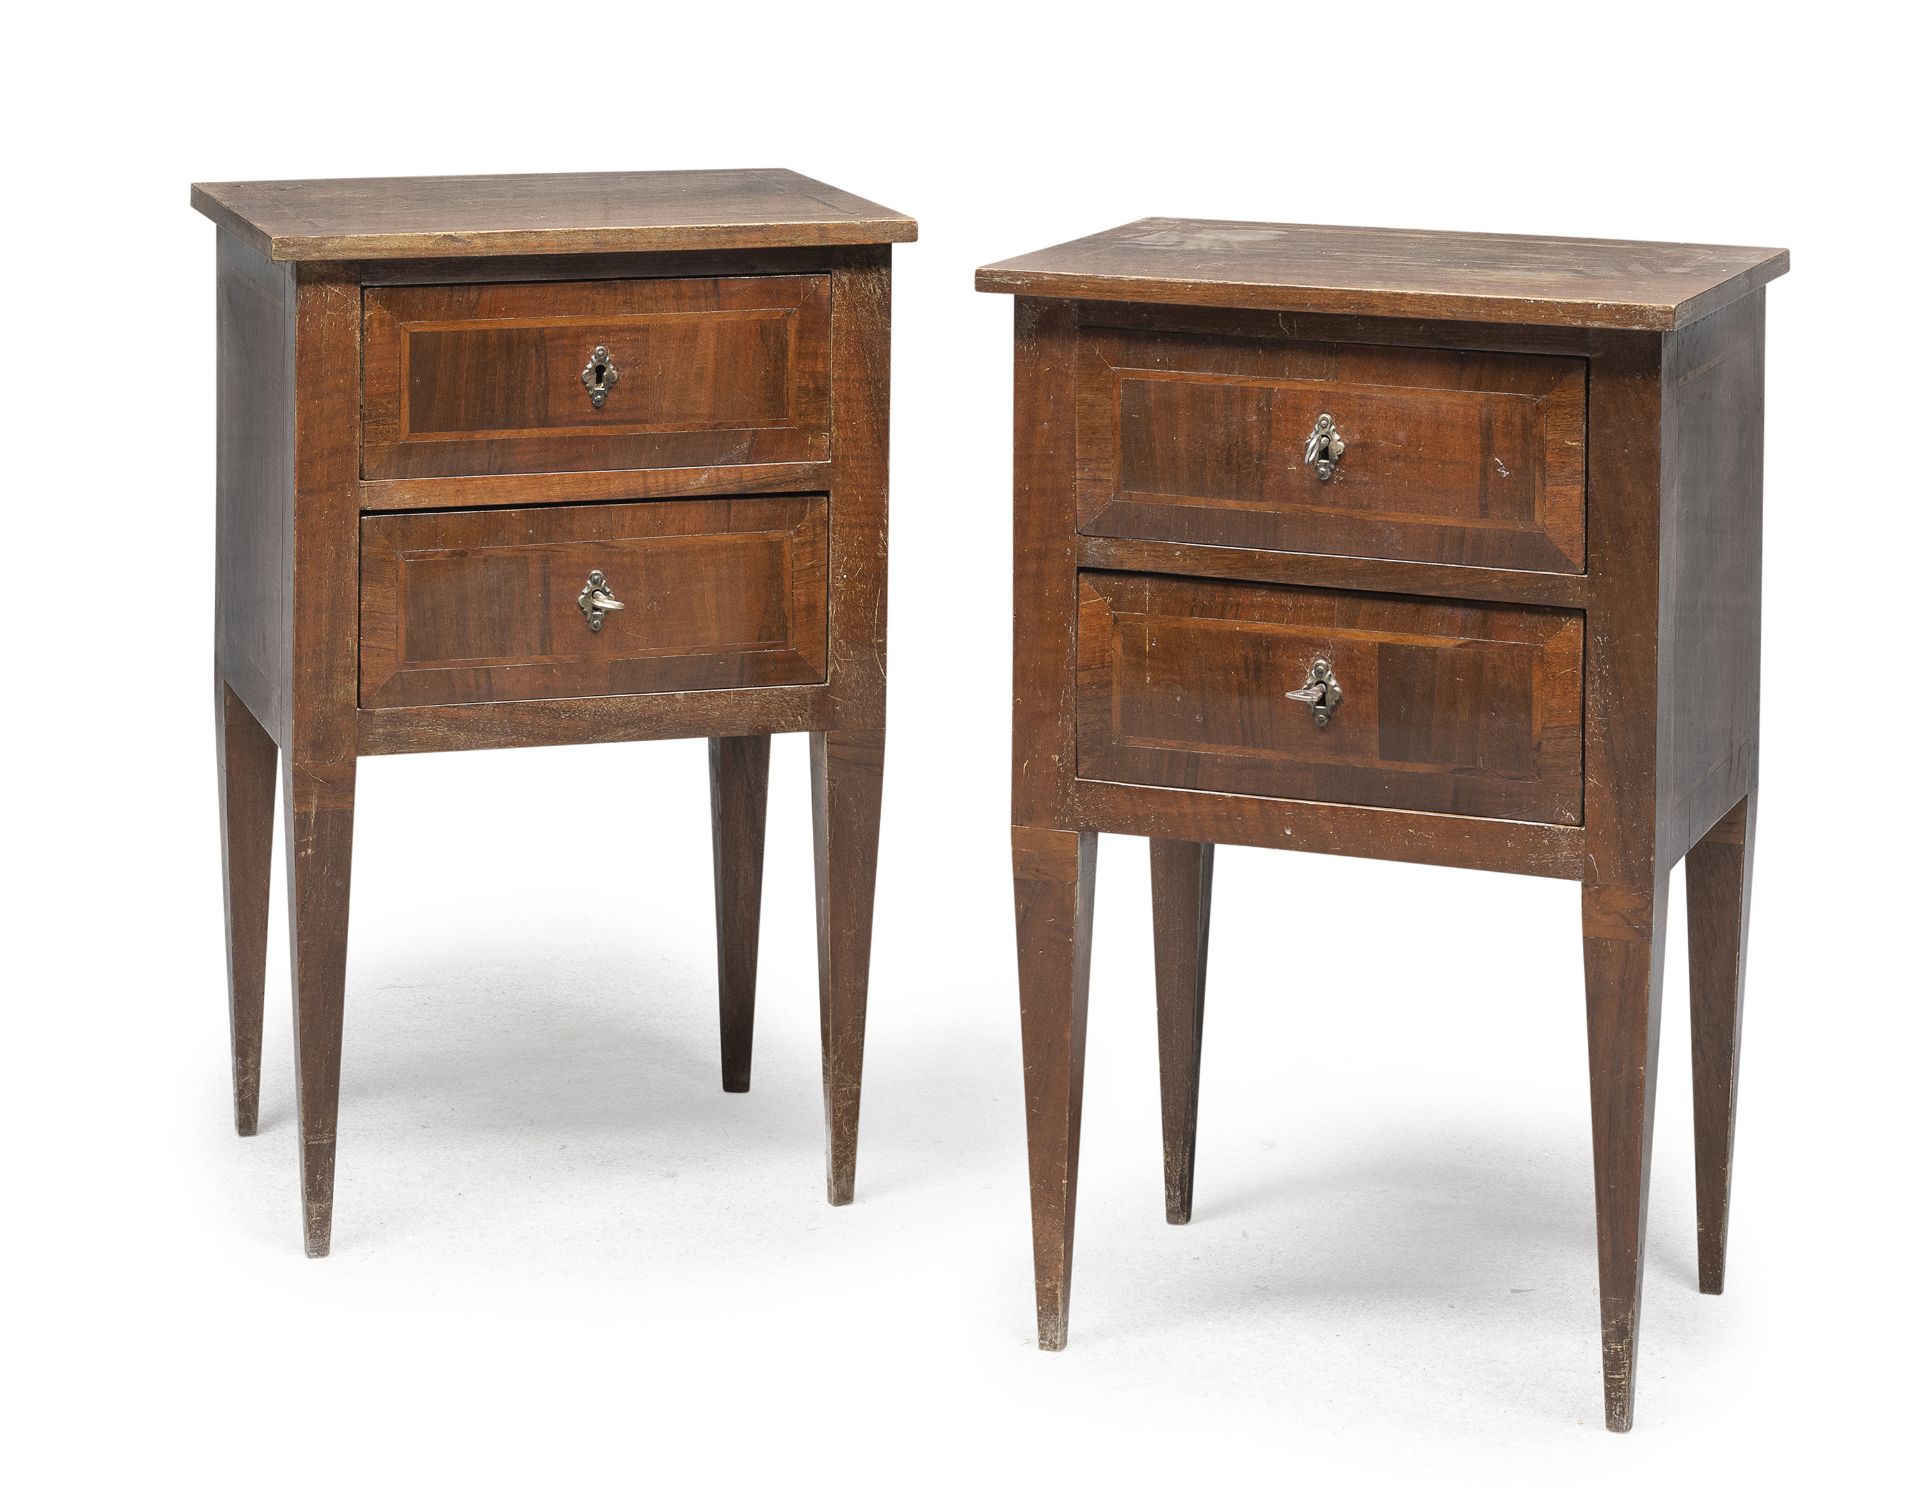 PAIR OF WALNUT BEDSIDE TABLES 19th CENTURY